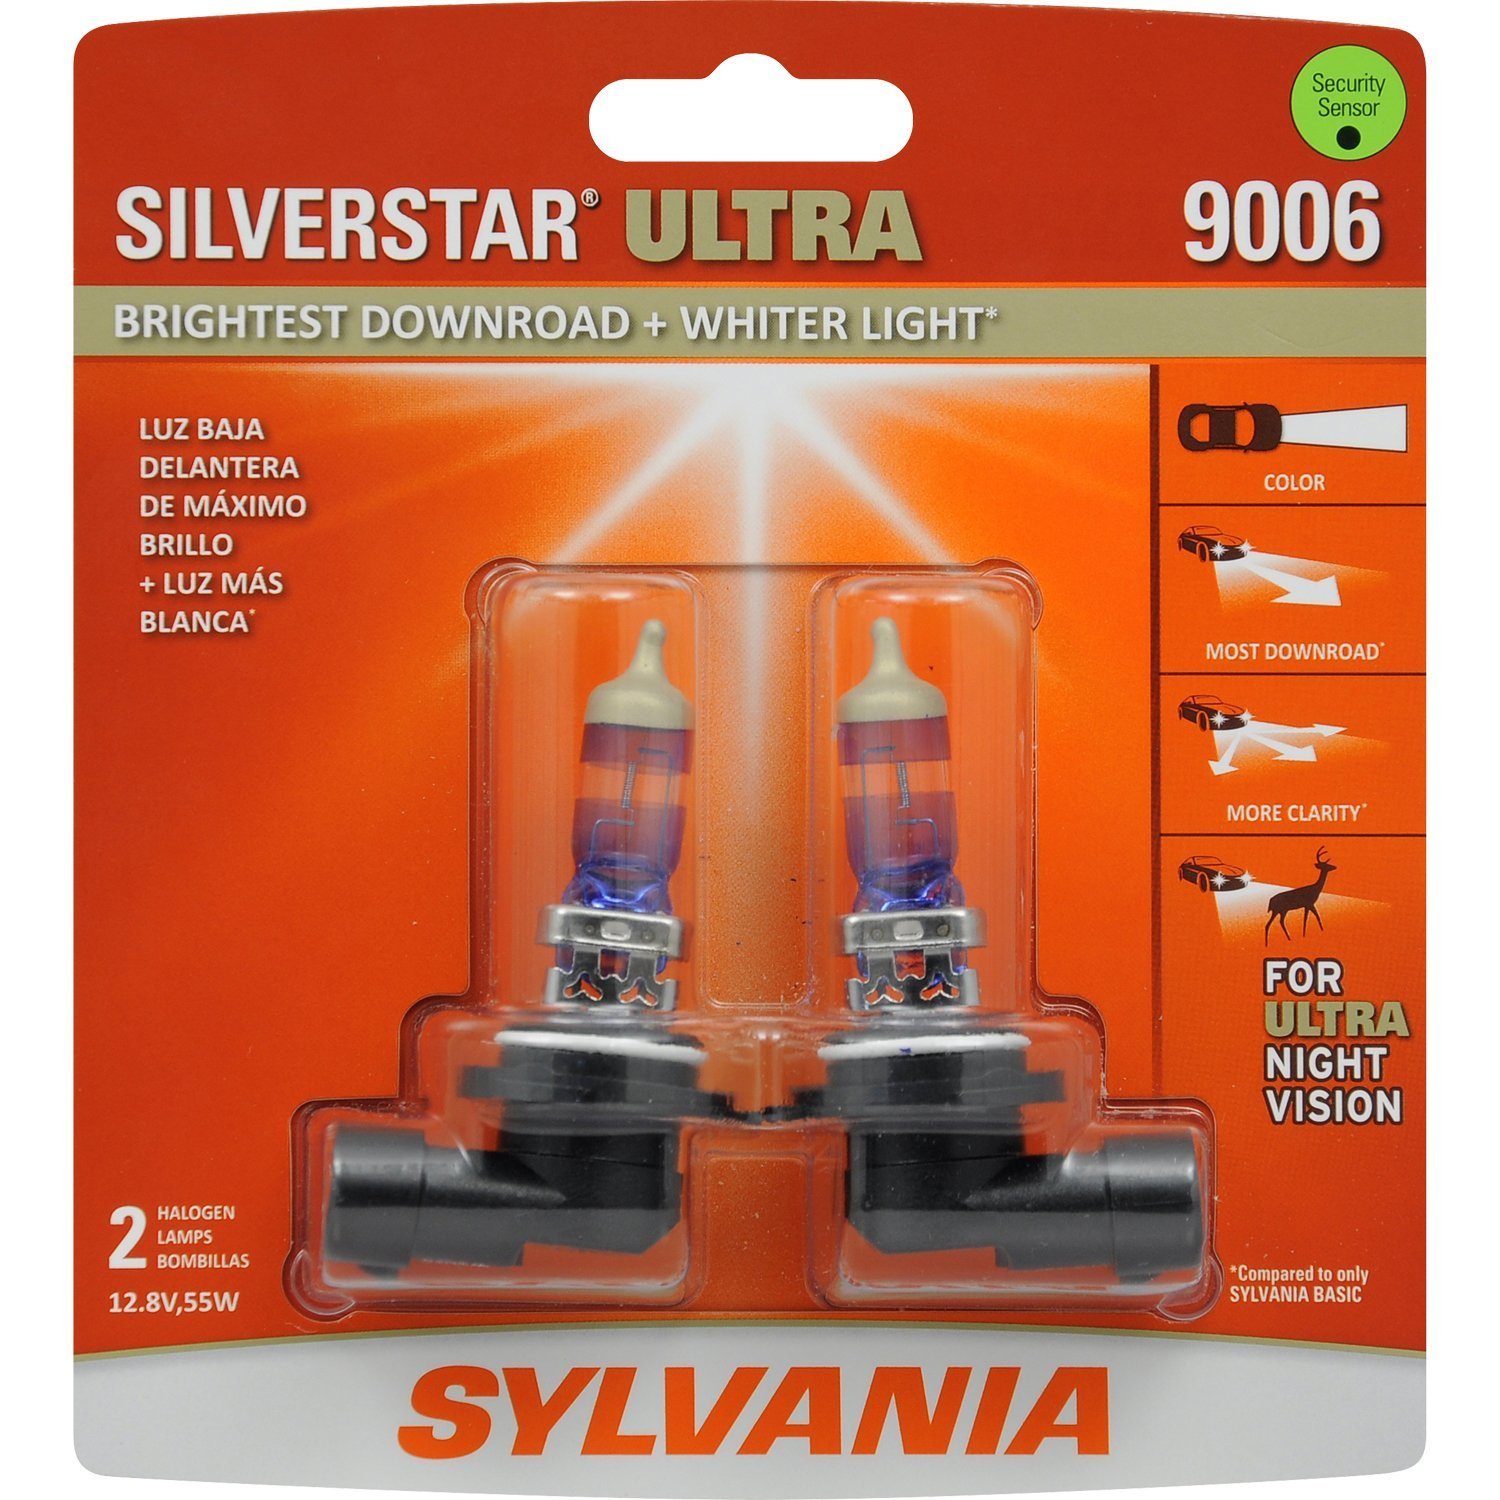 SYLVANIA - 9006 SilverStar Ultra - High Performance Halogen Headlight Bulb, High Beam, Low Beam and Fog Replacement Bulb, Brightest Downroad with Whiter Light, Tri-Band Technology